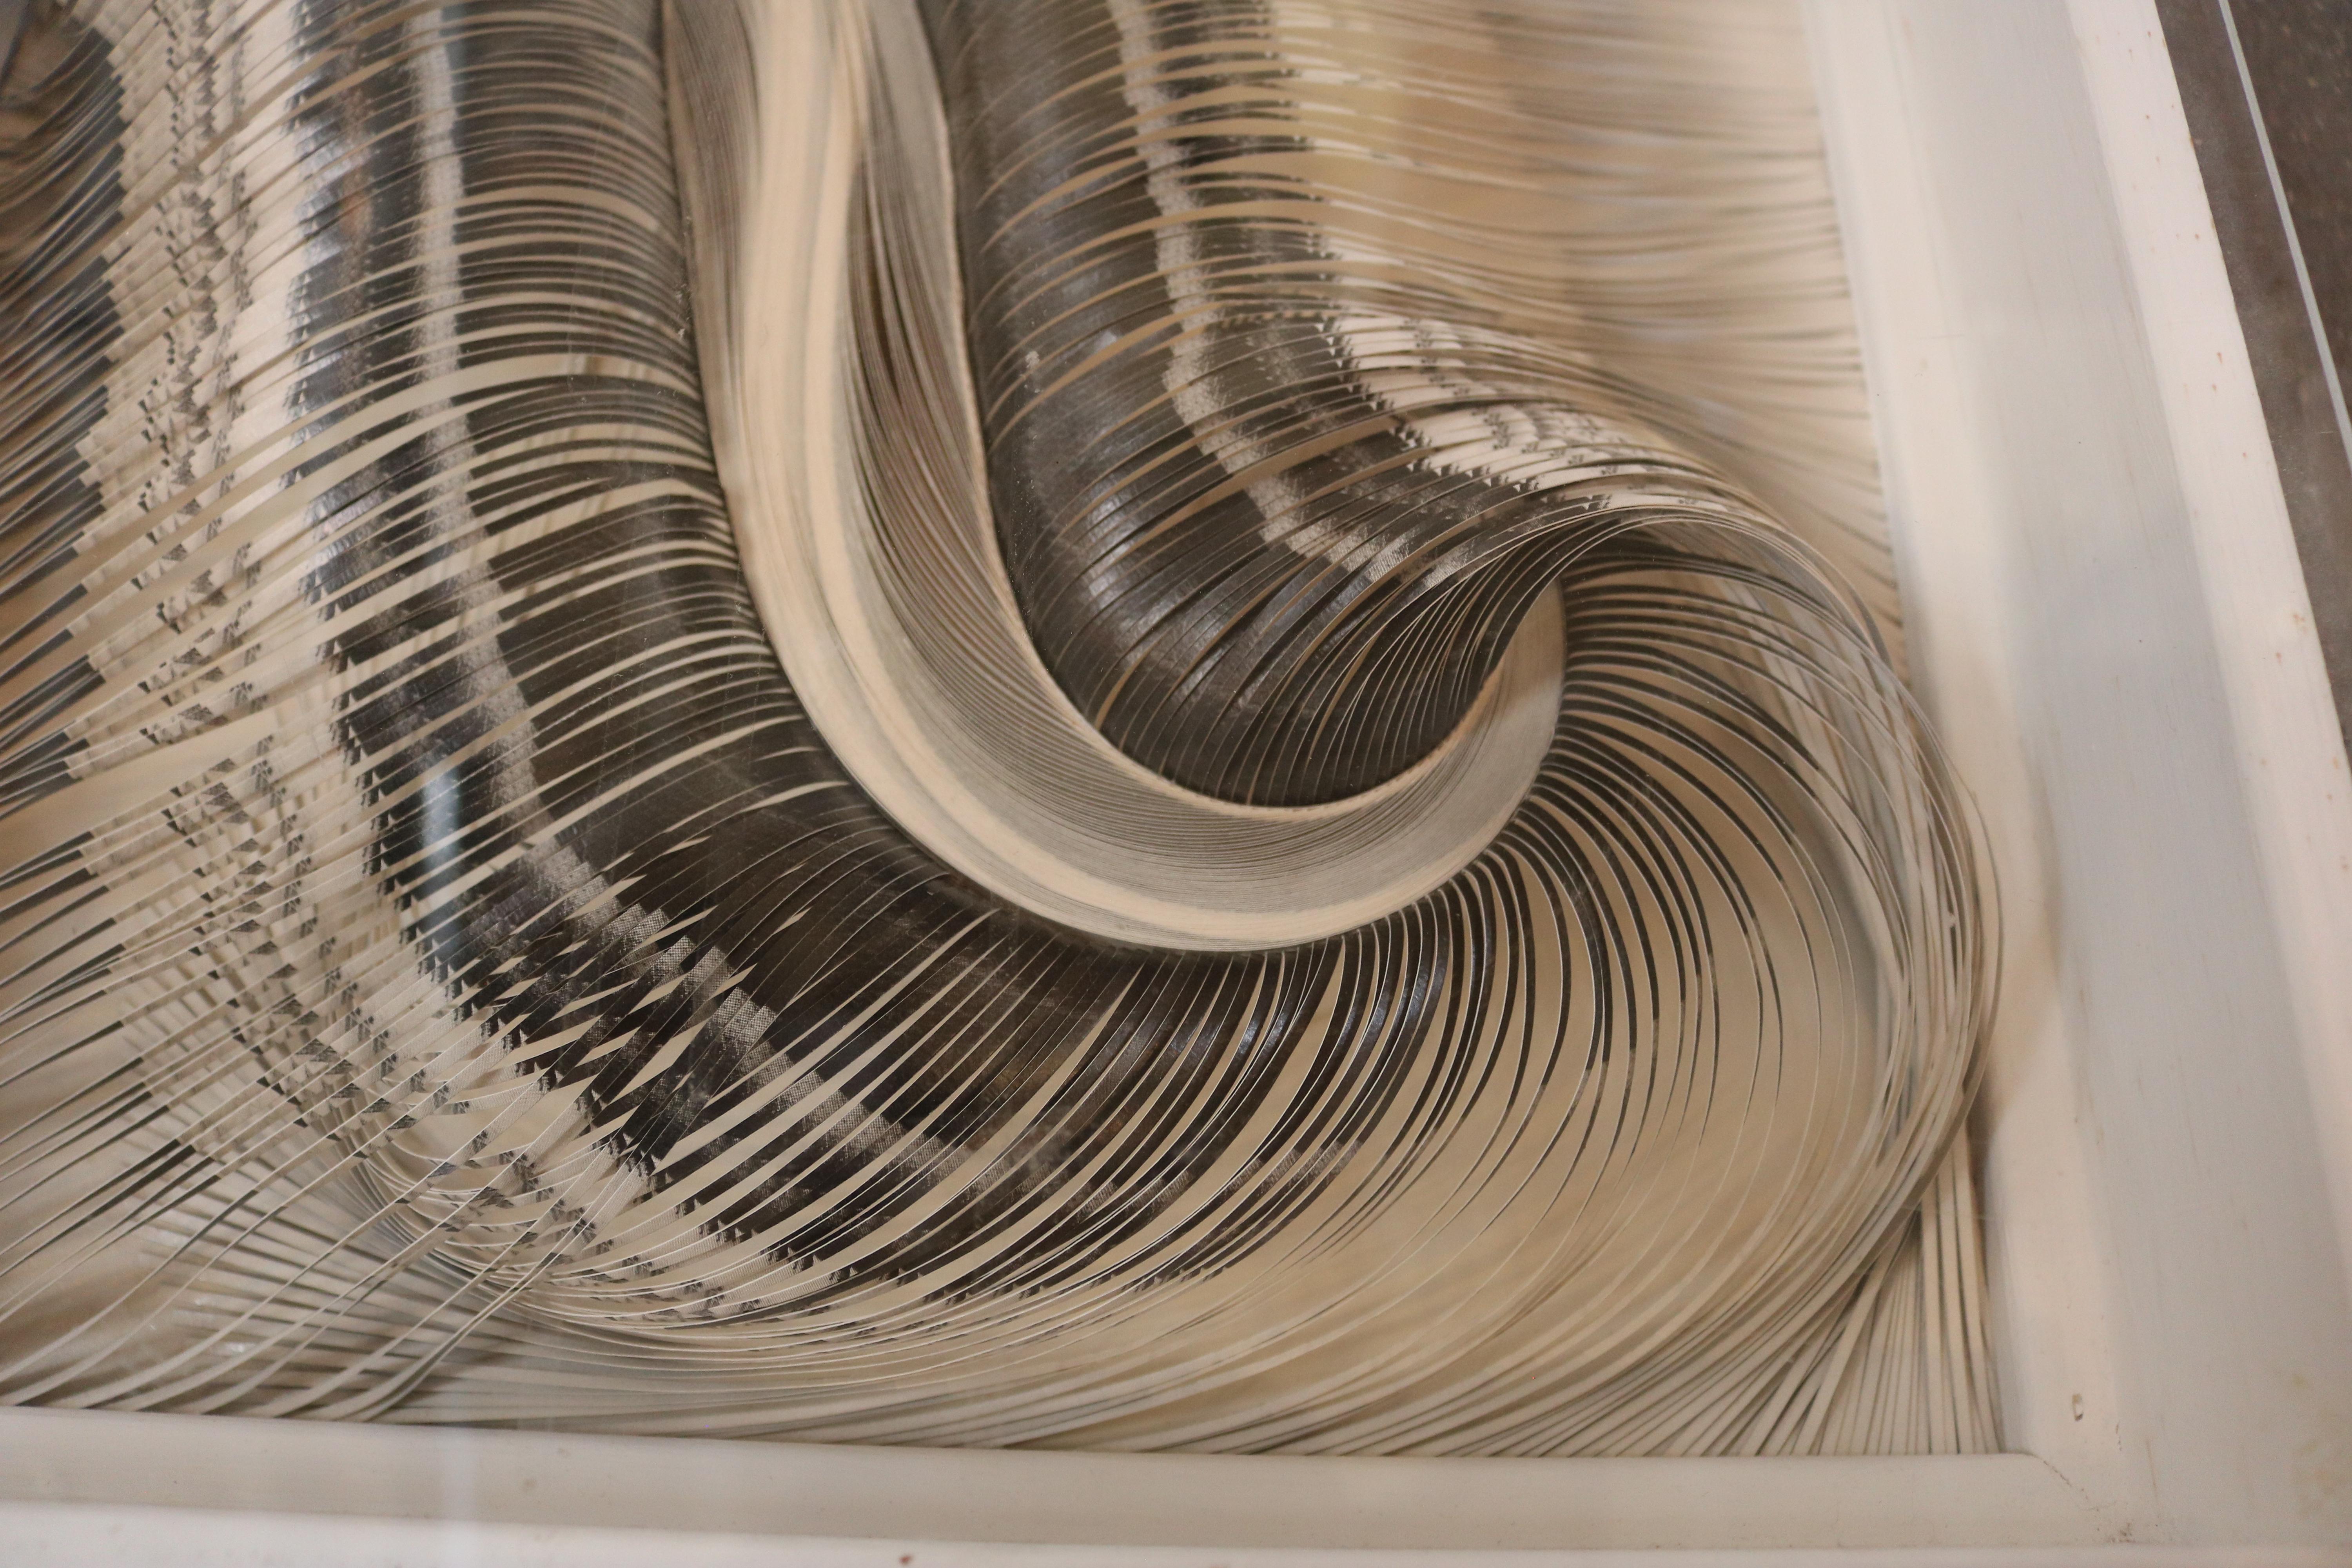 This noteworthy abstract wall sculpture by Eve Tartar almost resembles an expanded Slinky. It has the words 